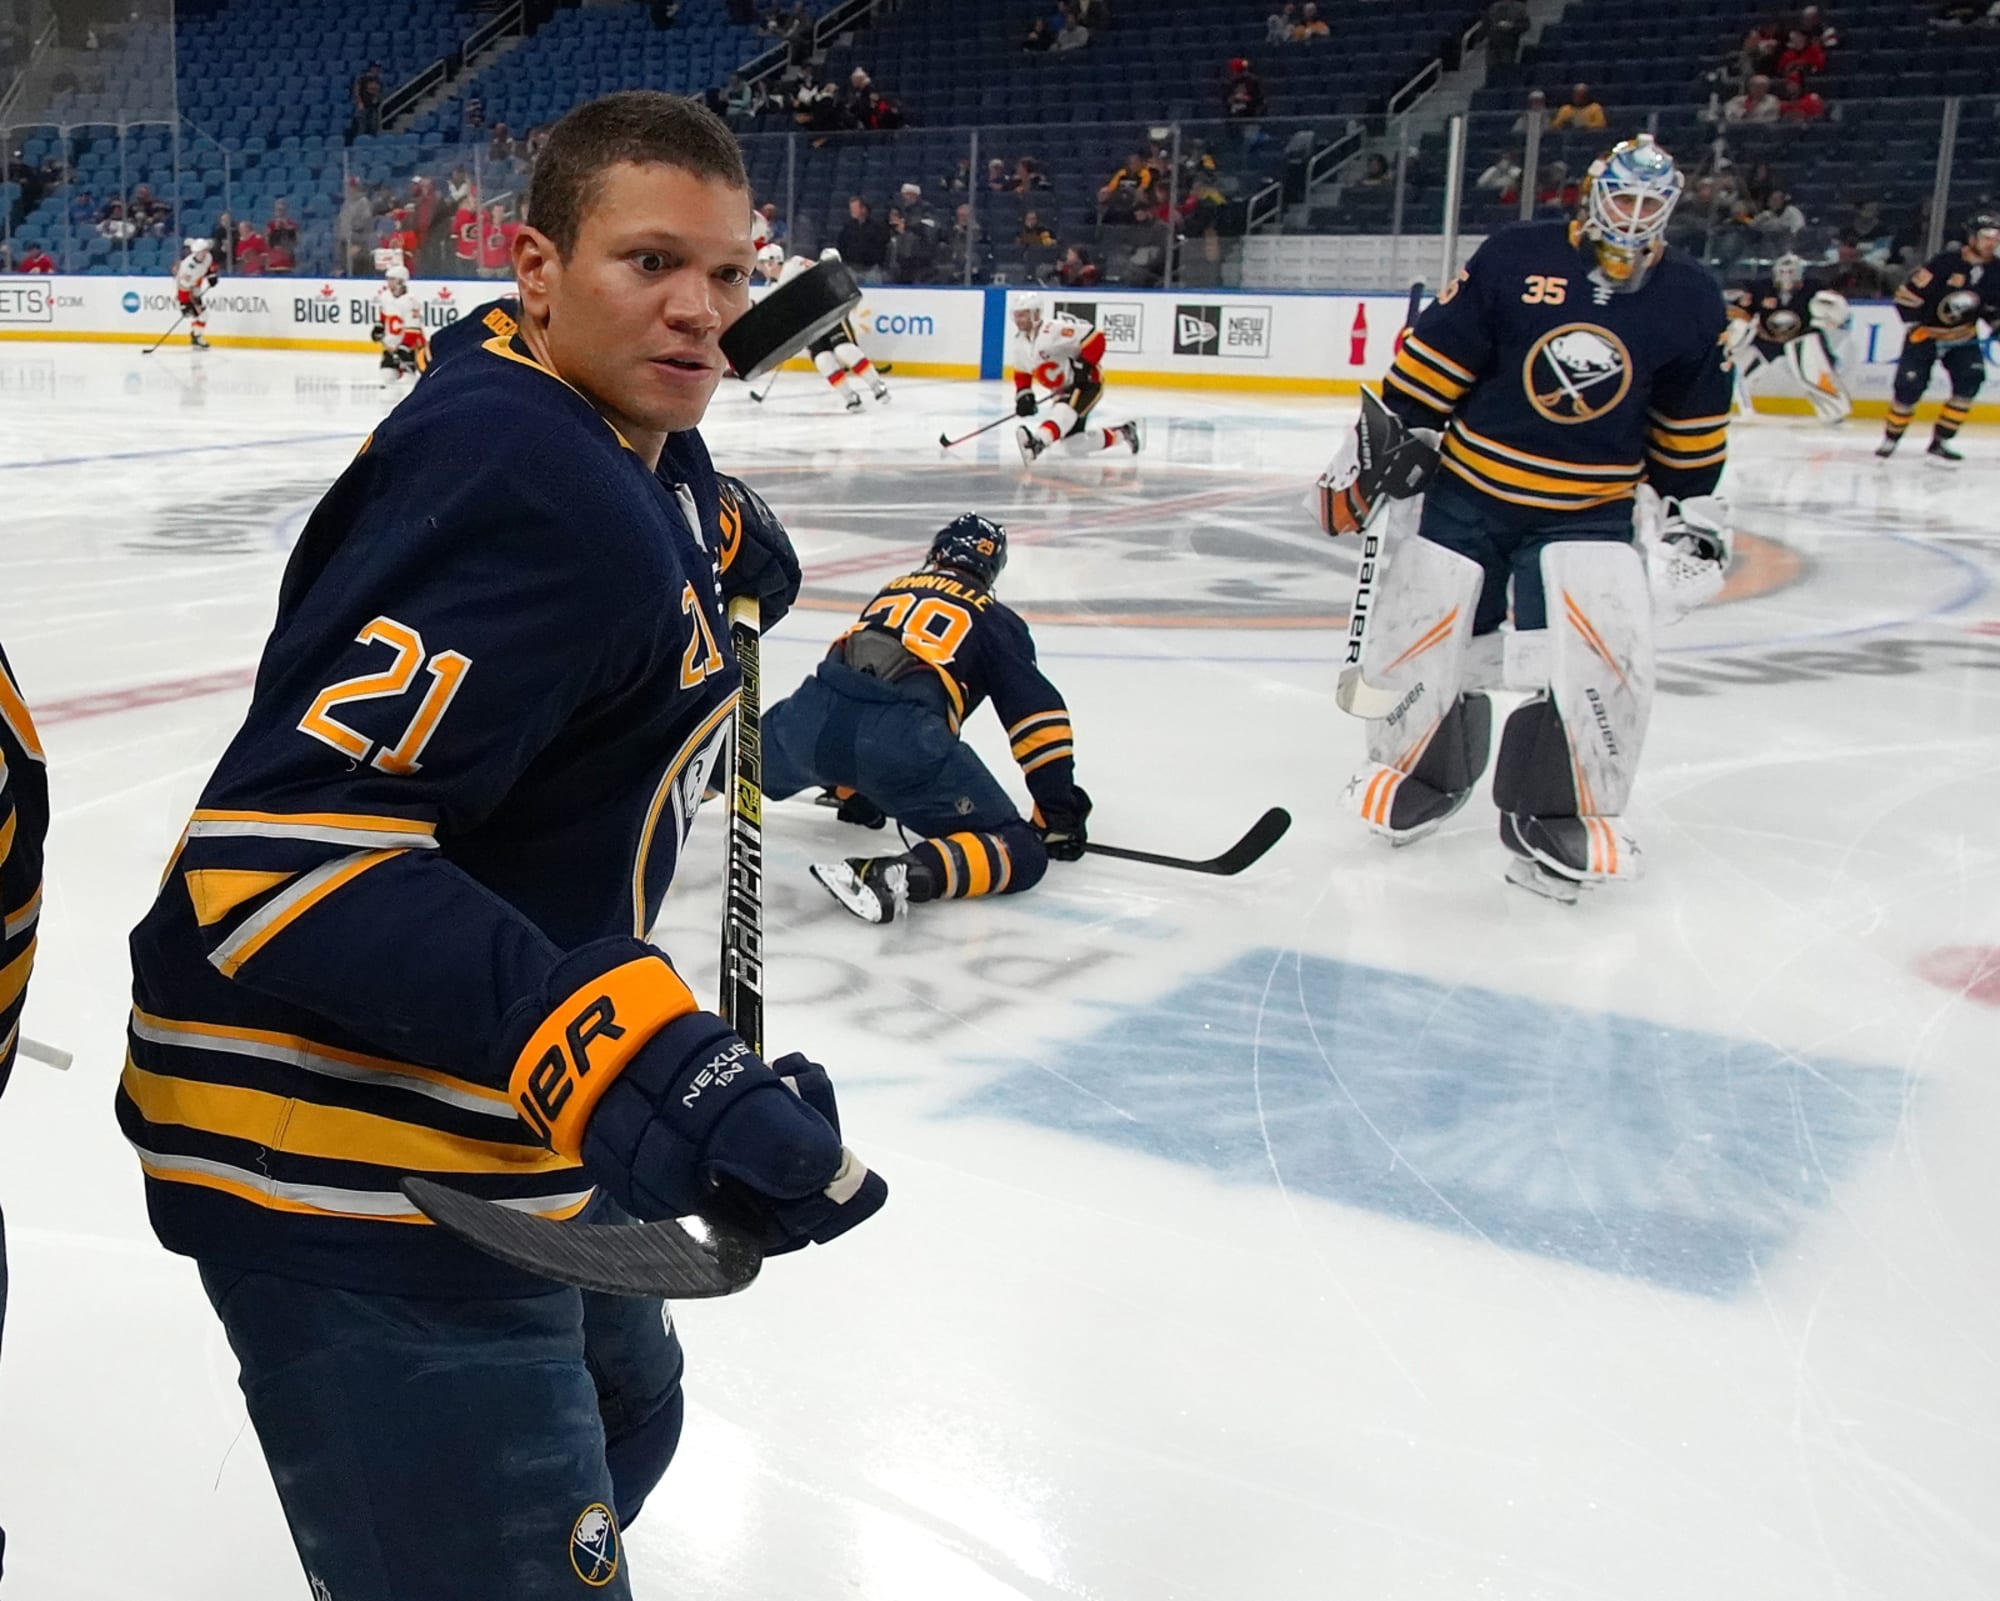 Kyle Okposo at 2017 All-Star  Buffalo Sabres Beyond Blue & Gold 